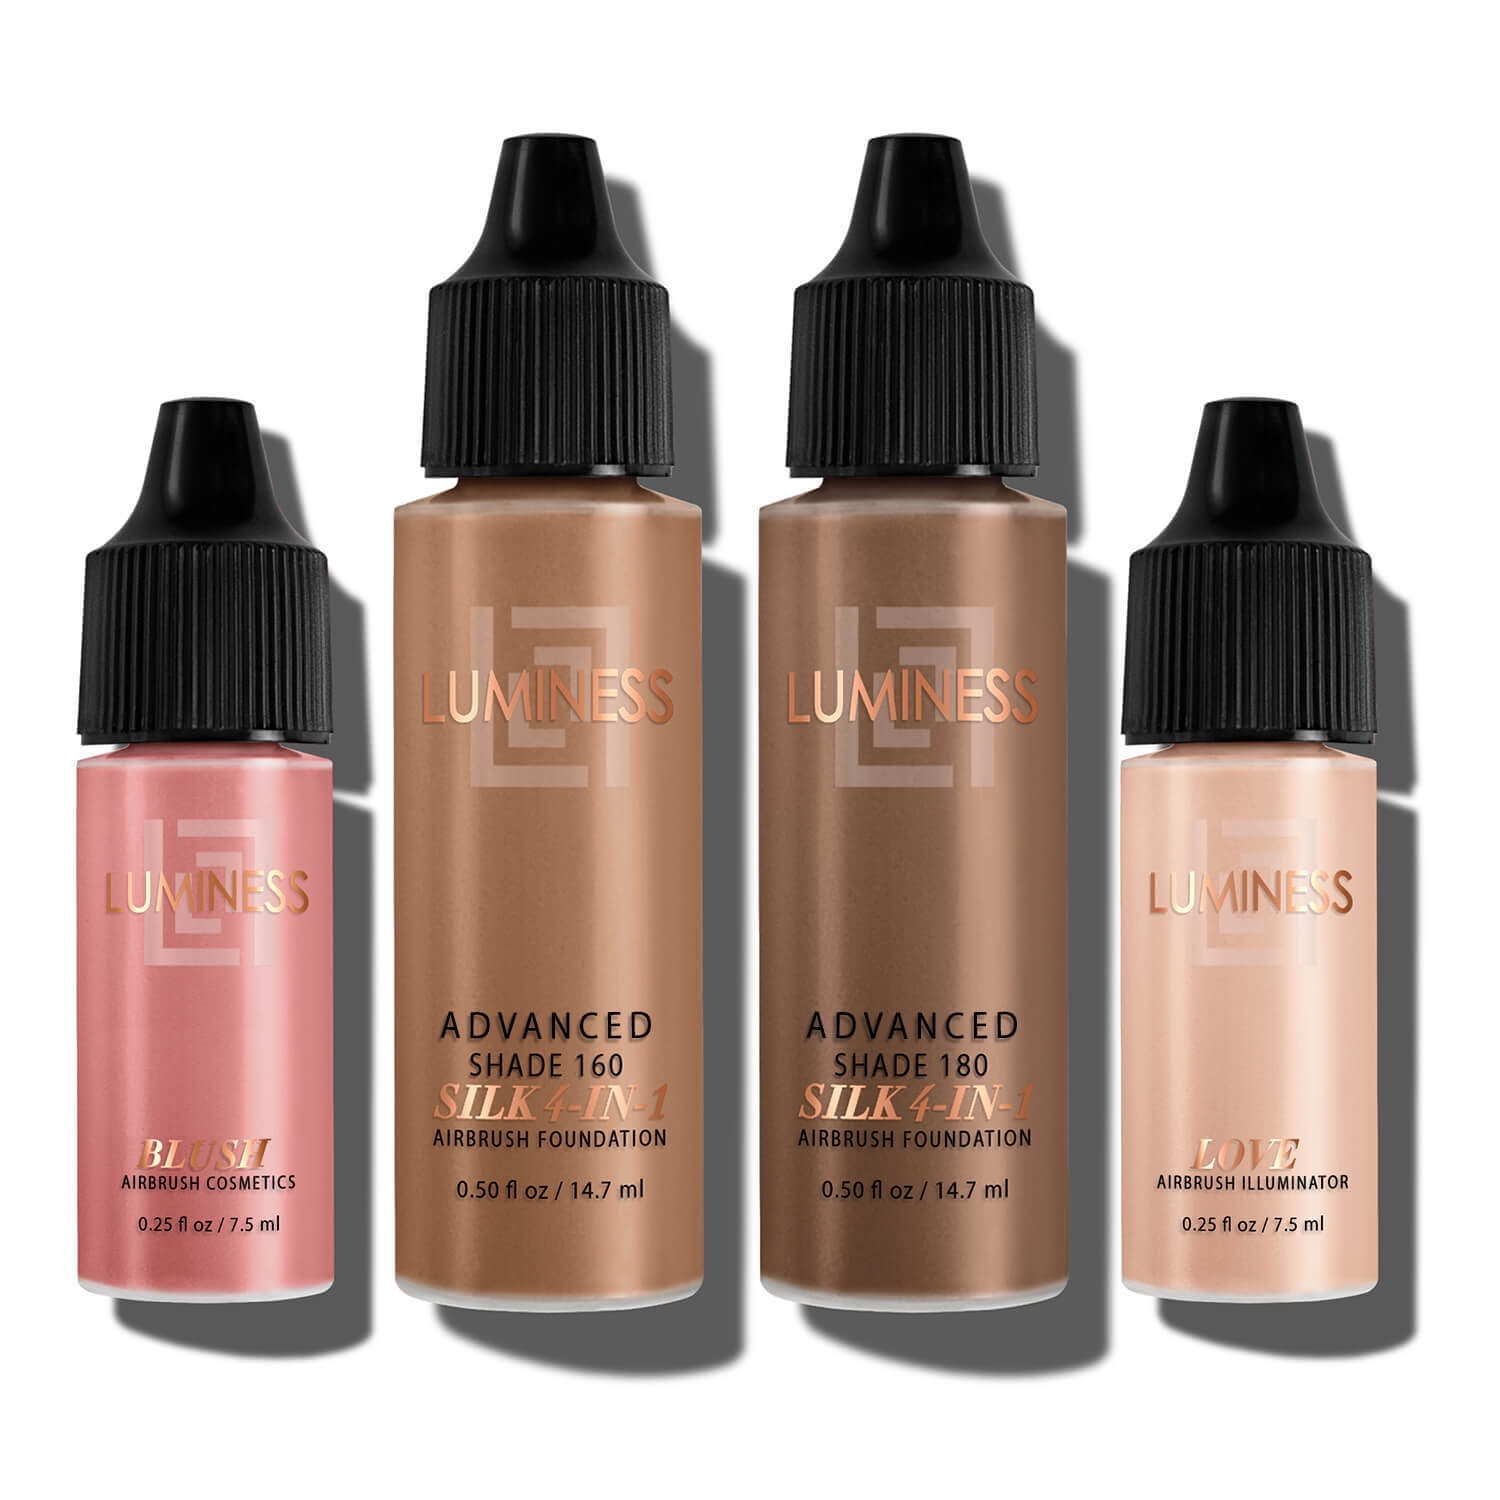  Luminess Silk 4-in-1 Airbrush Foundation Makeup Starter Kit -  Fair Coverage, 6-piece - Includes 2x Silk Airbrush Foundation, Blush, Glow  Highlighter, Moisturizer Primer & Airbrush Cleaning Solution : Beauty &  Personal Care